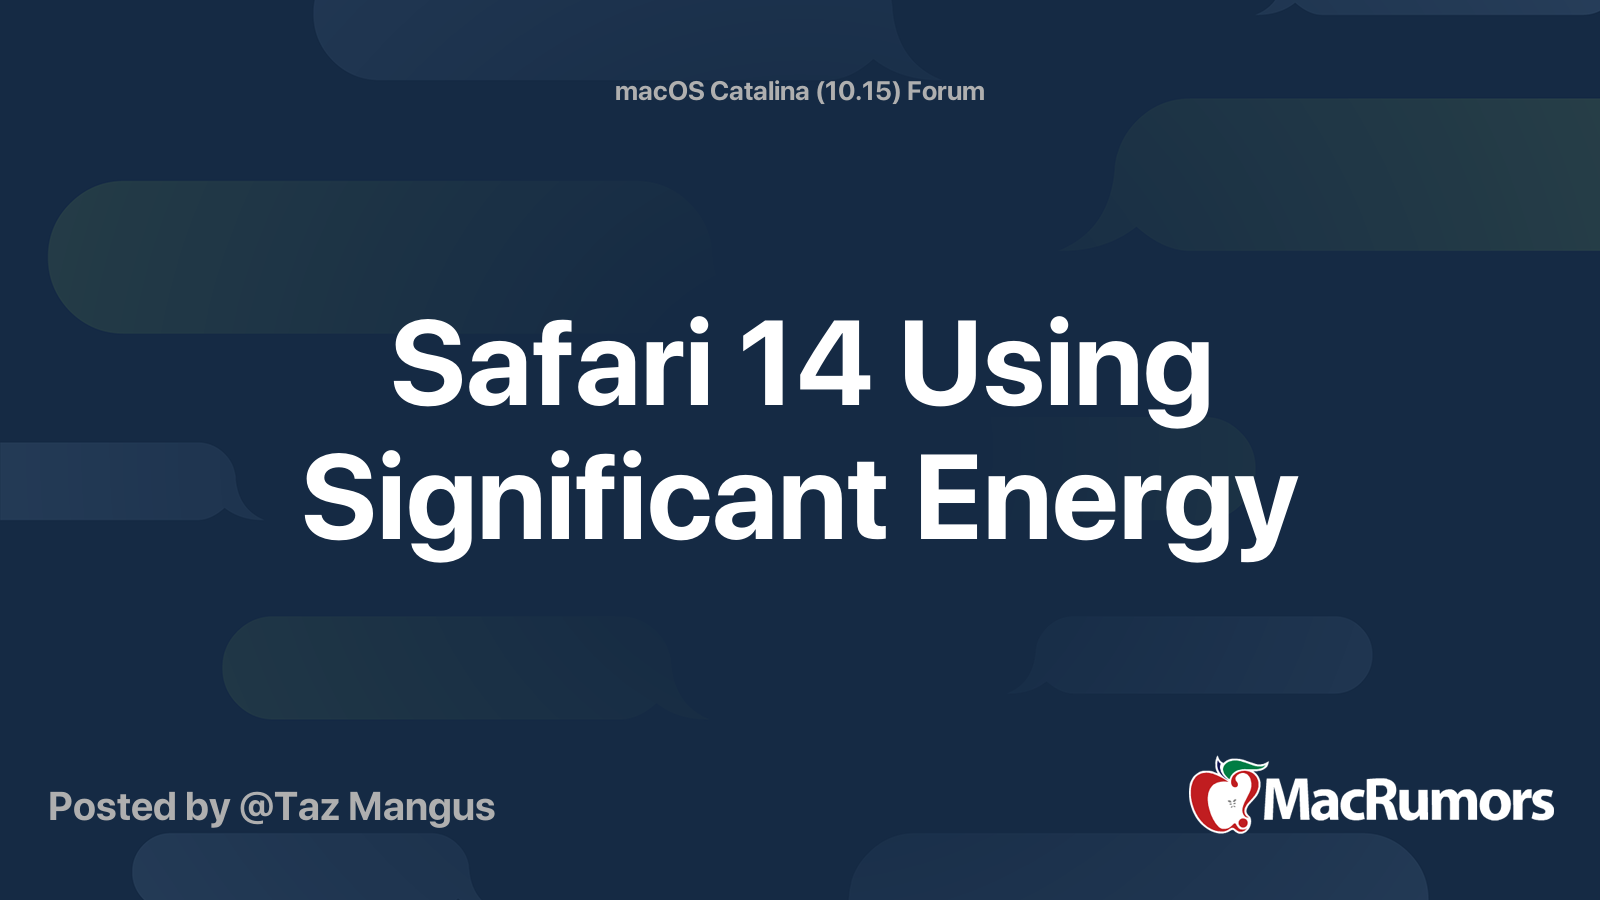 safari page using significant energy